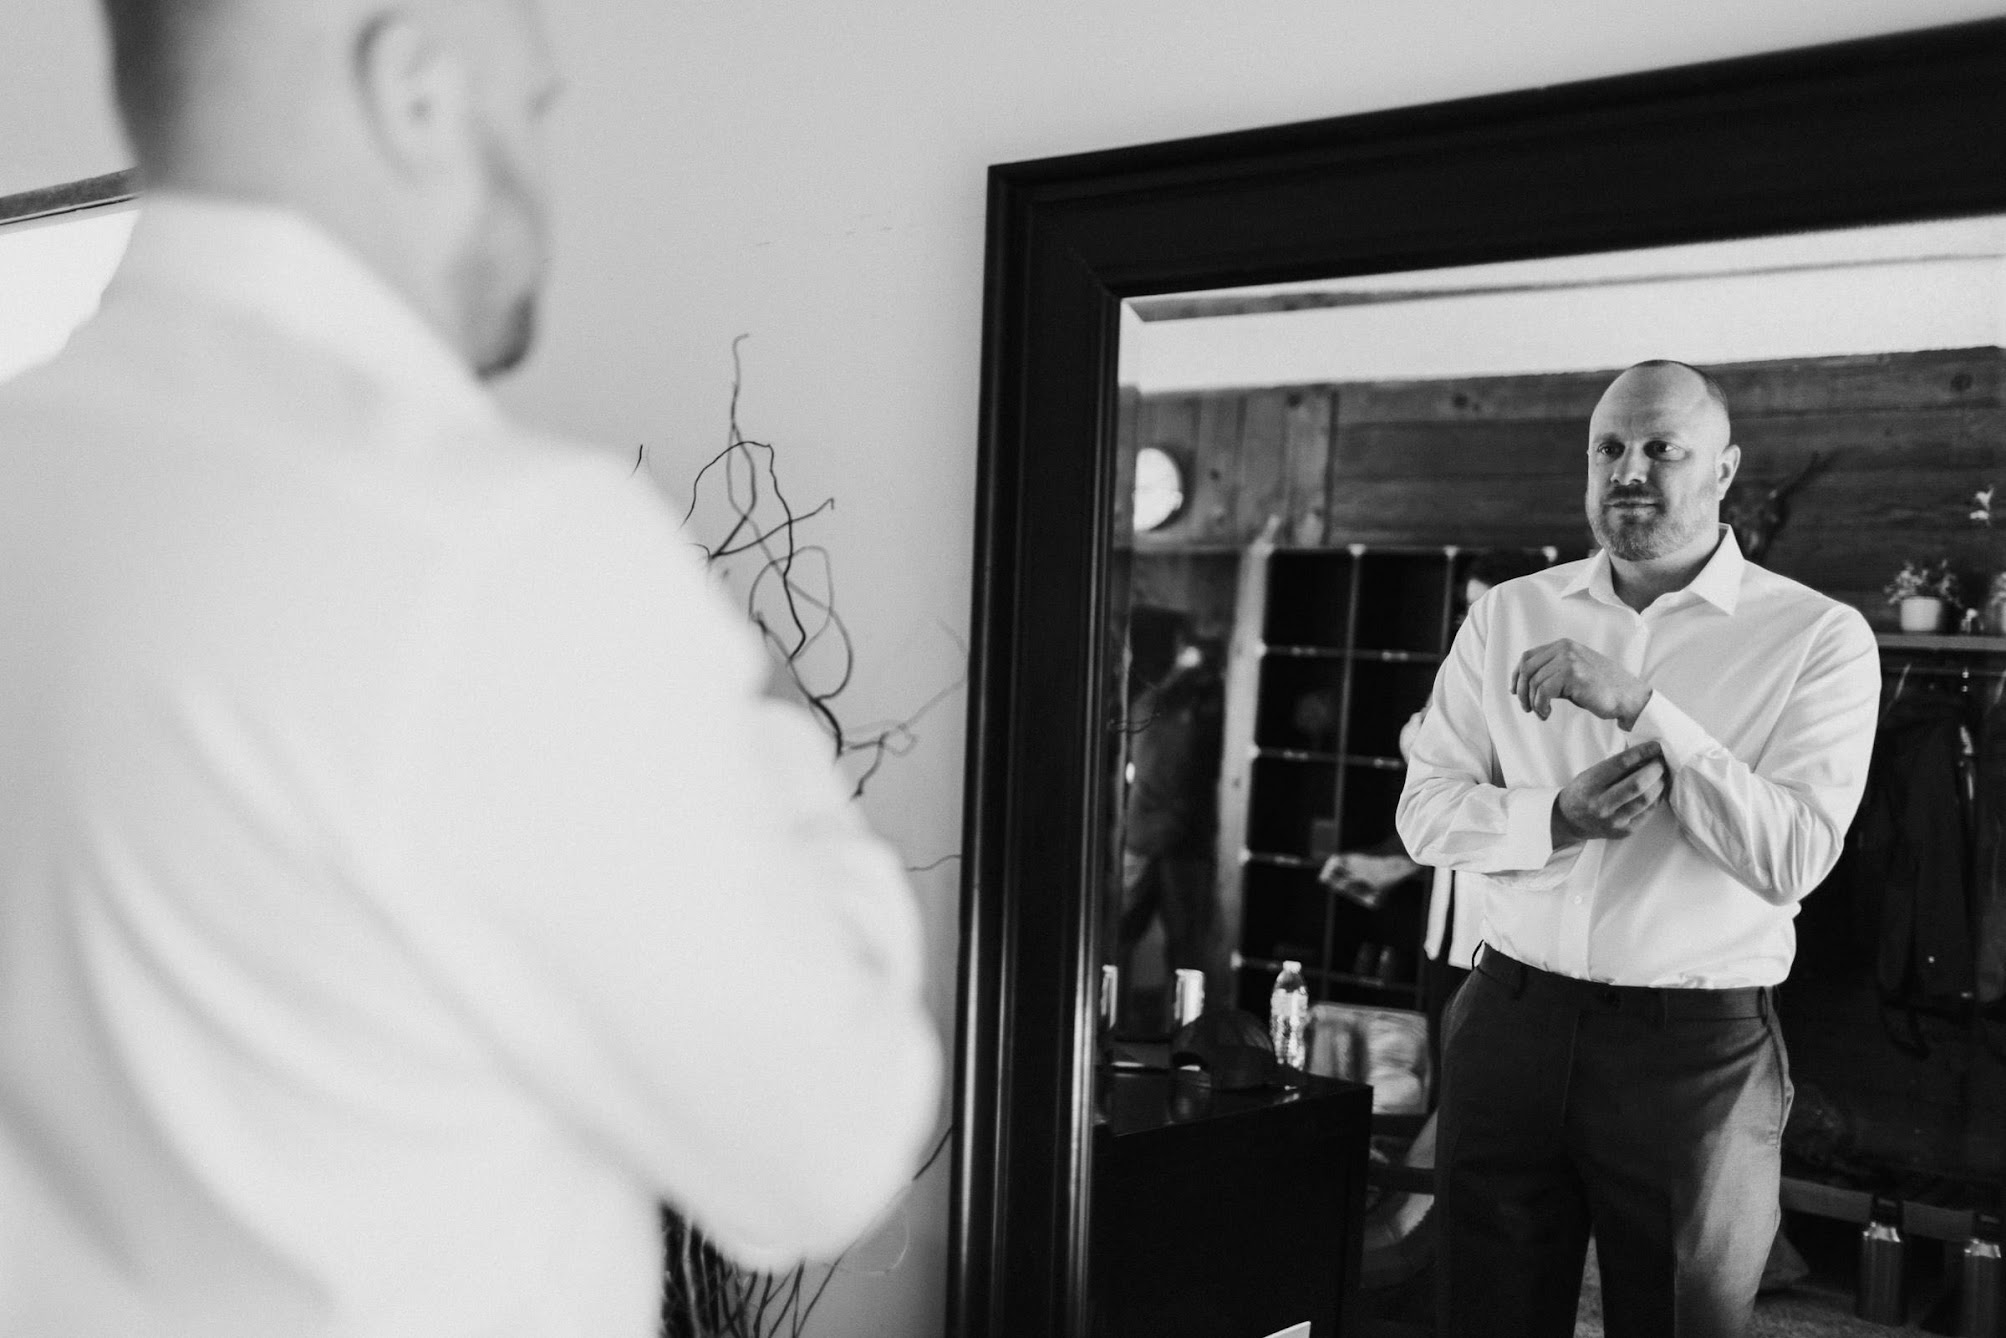 The groom looking the mirror while he gets ready, fixing is collard shirt